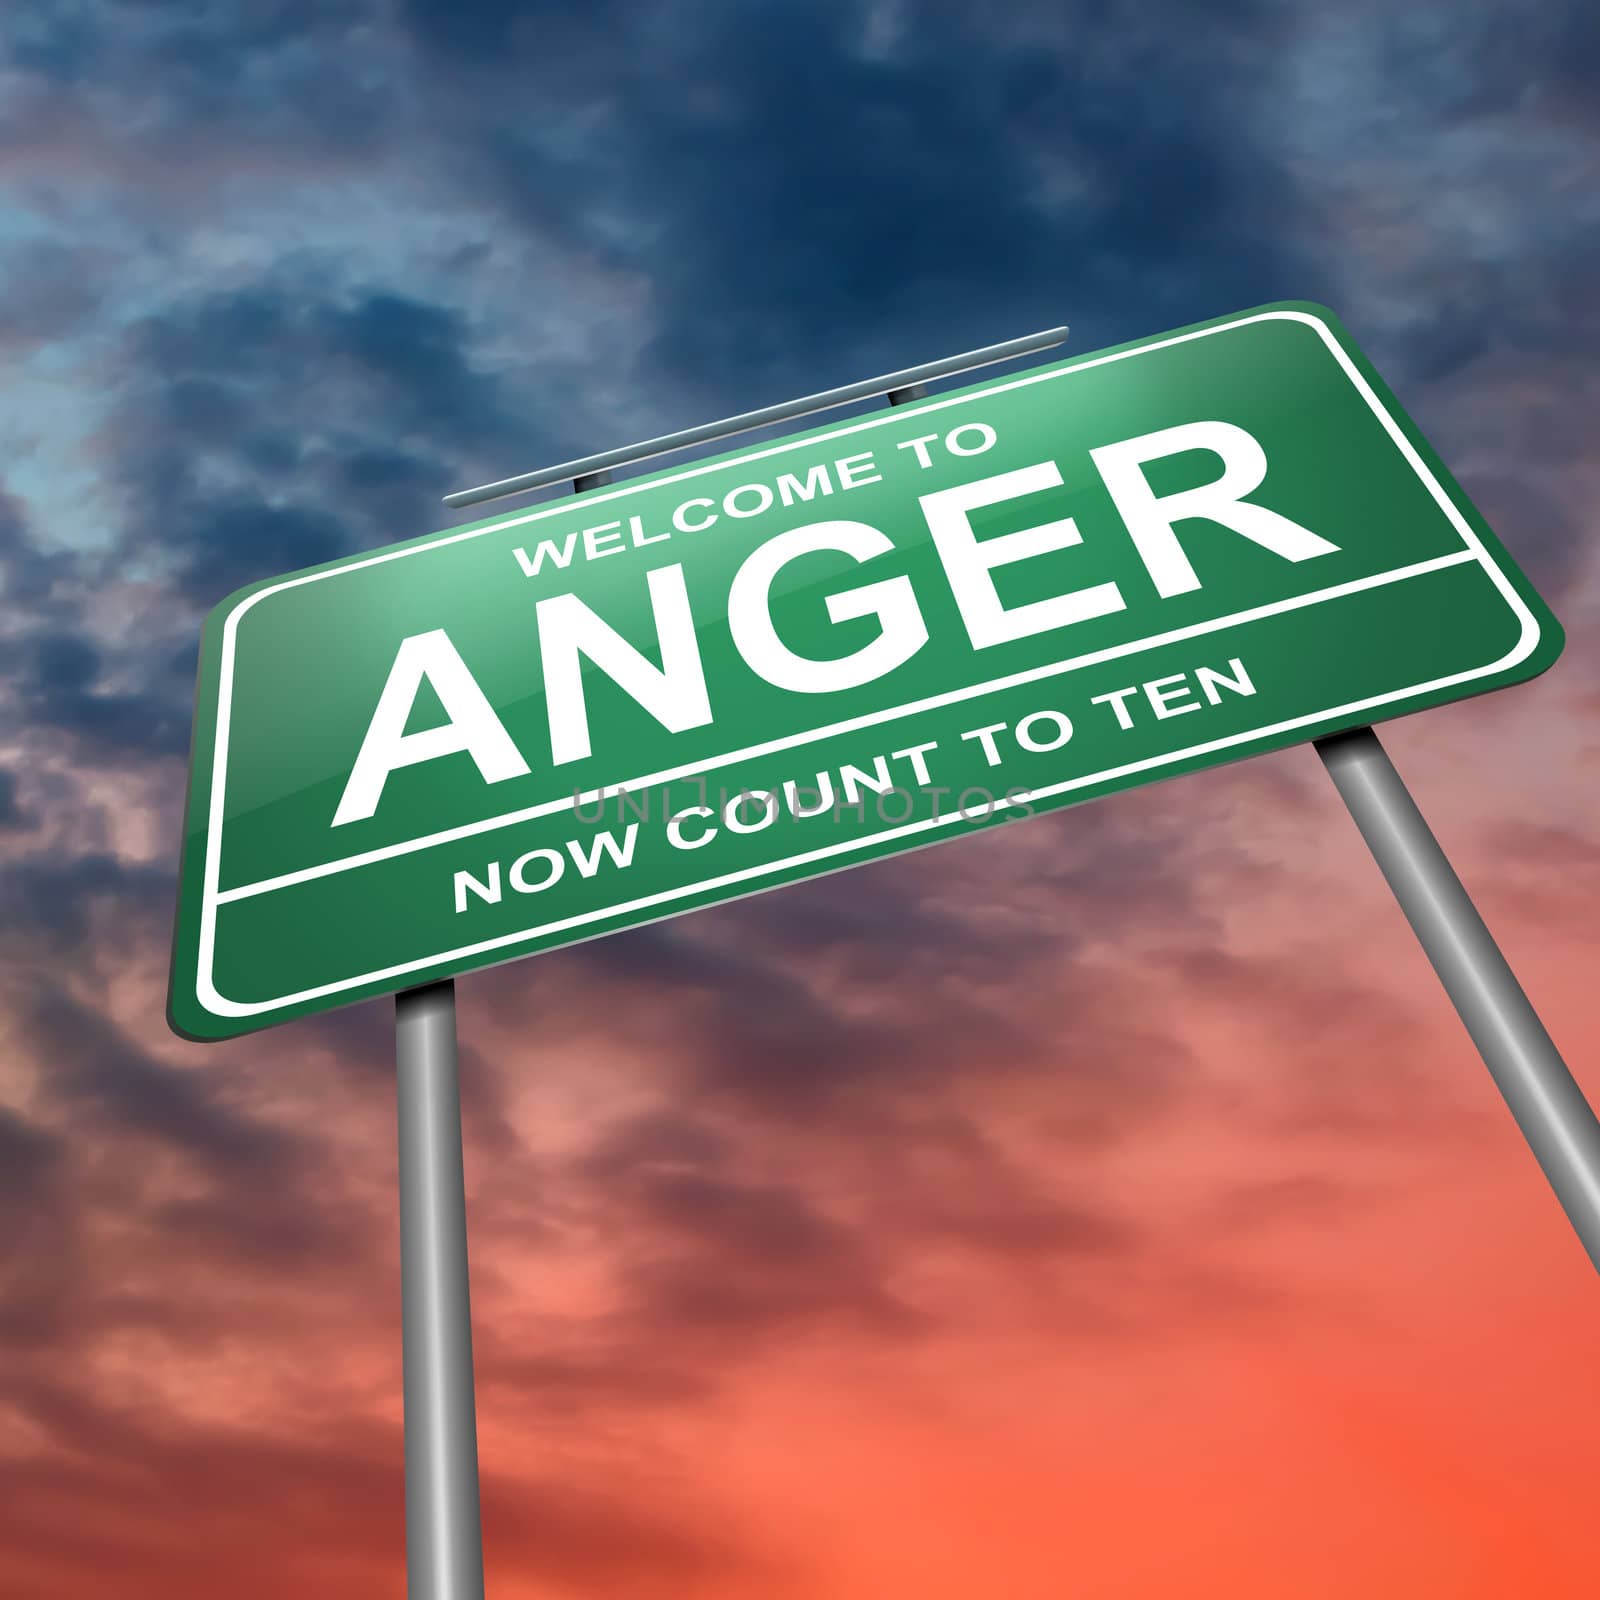 Illustration depicting an illuminated green roadsign with an anger concept. Dramatic sky background.